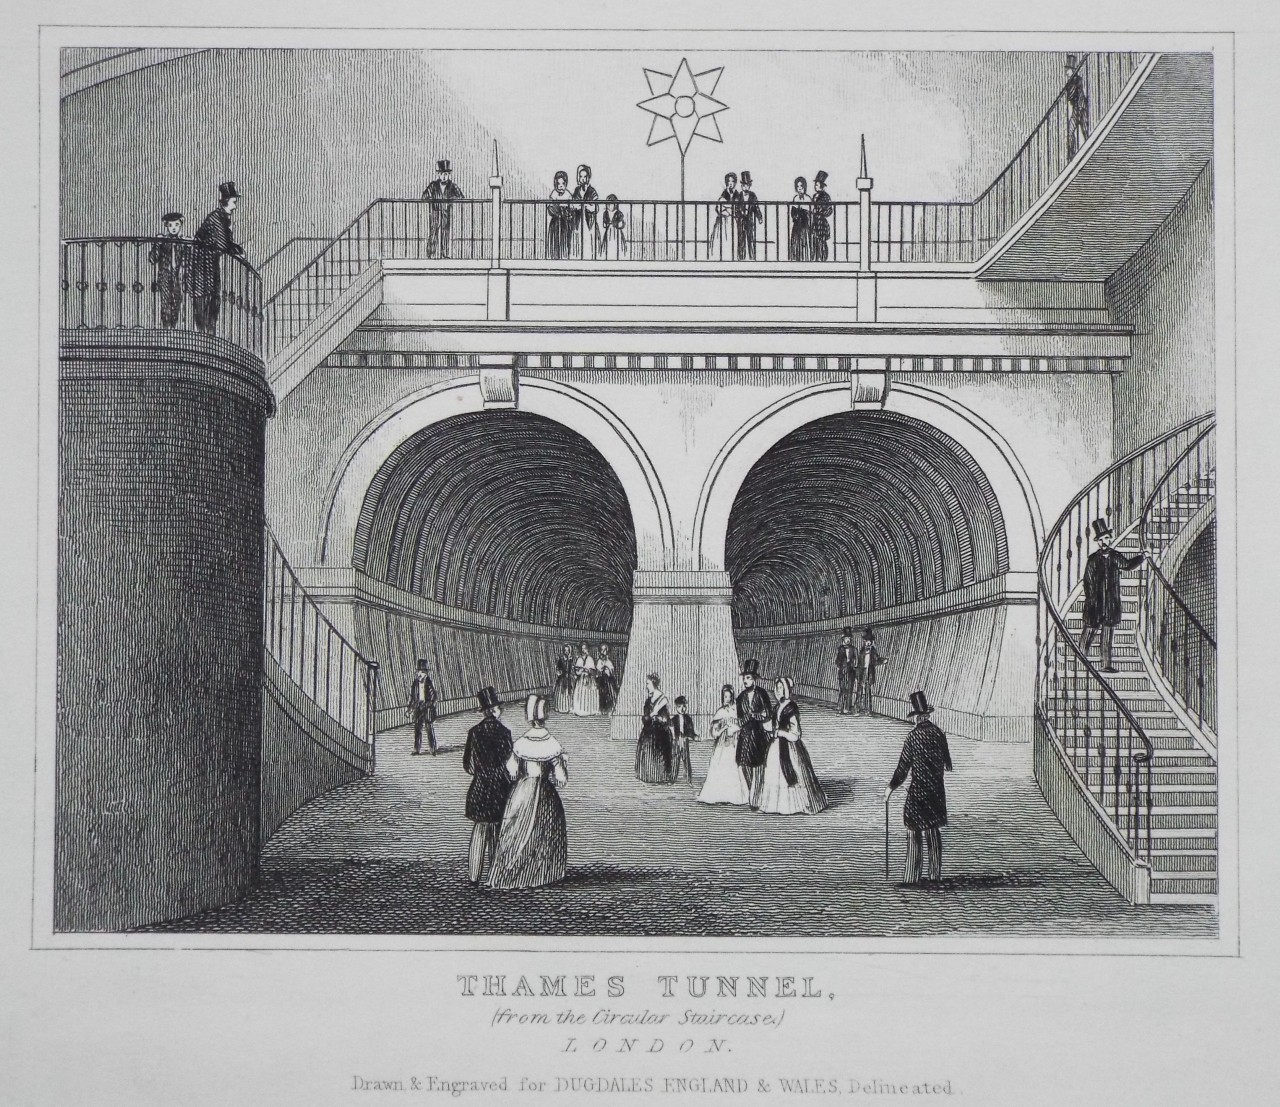 Print - Thames Tunnel, (from the Circular Staircase,) London.